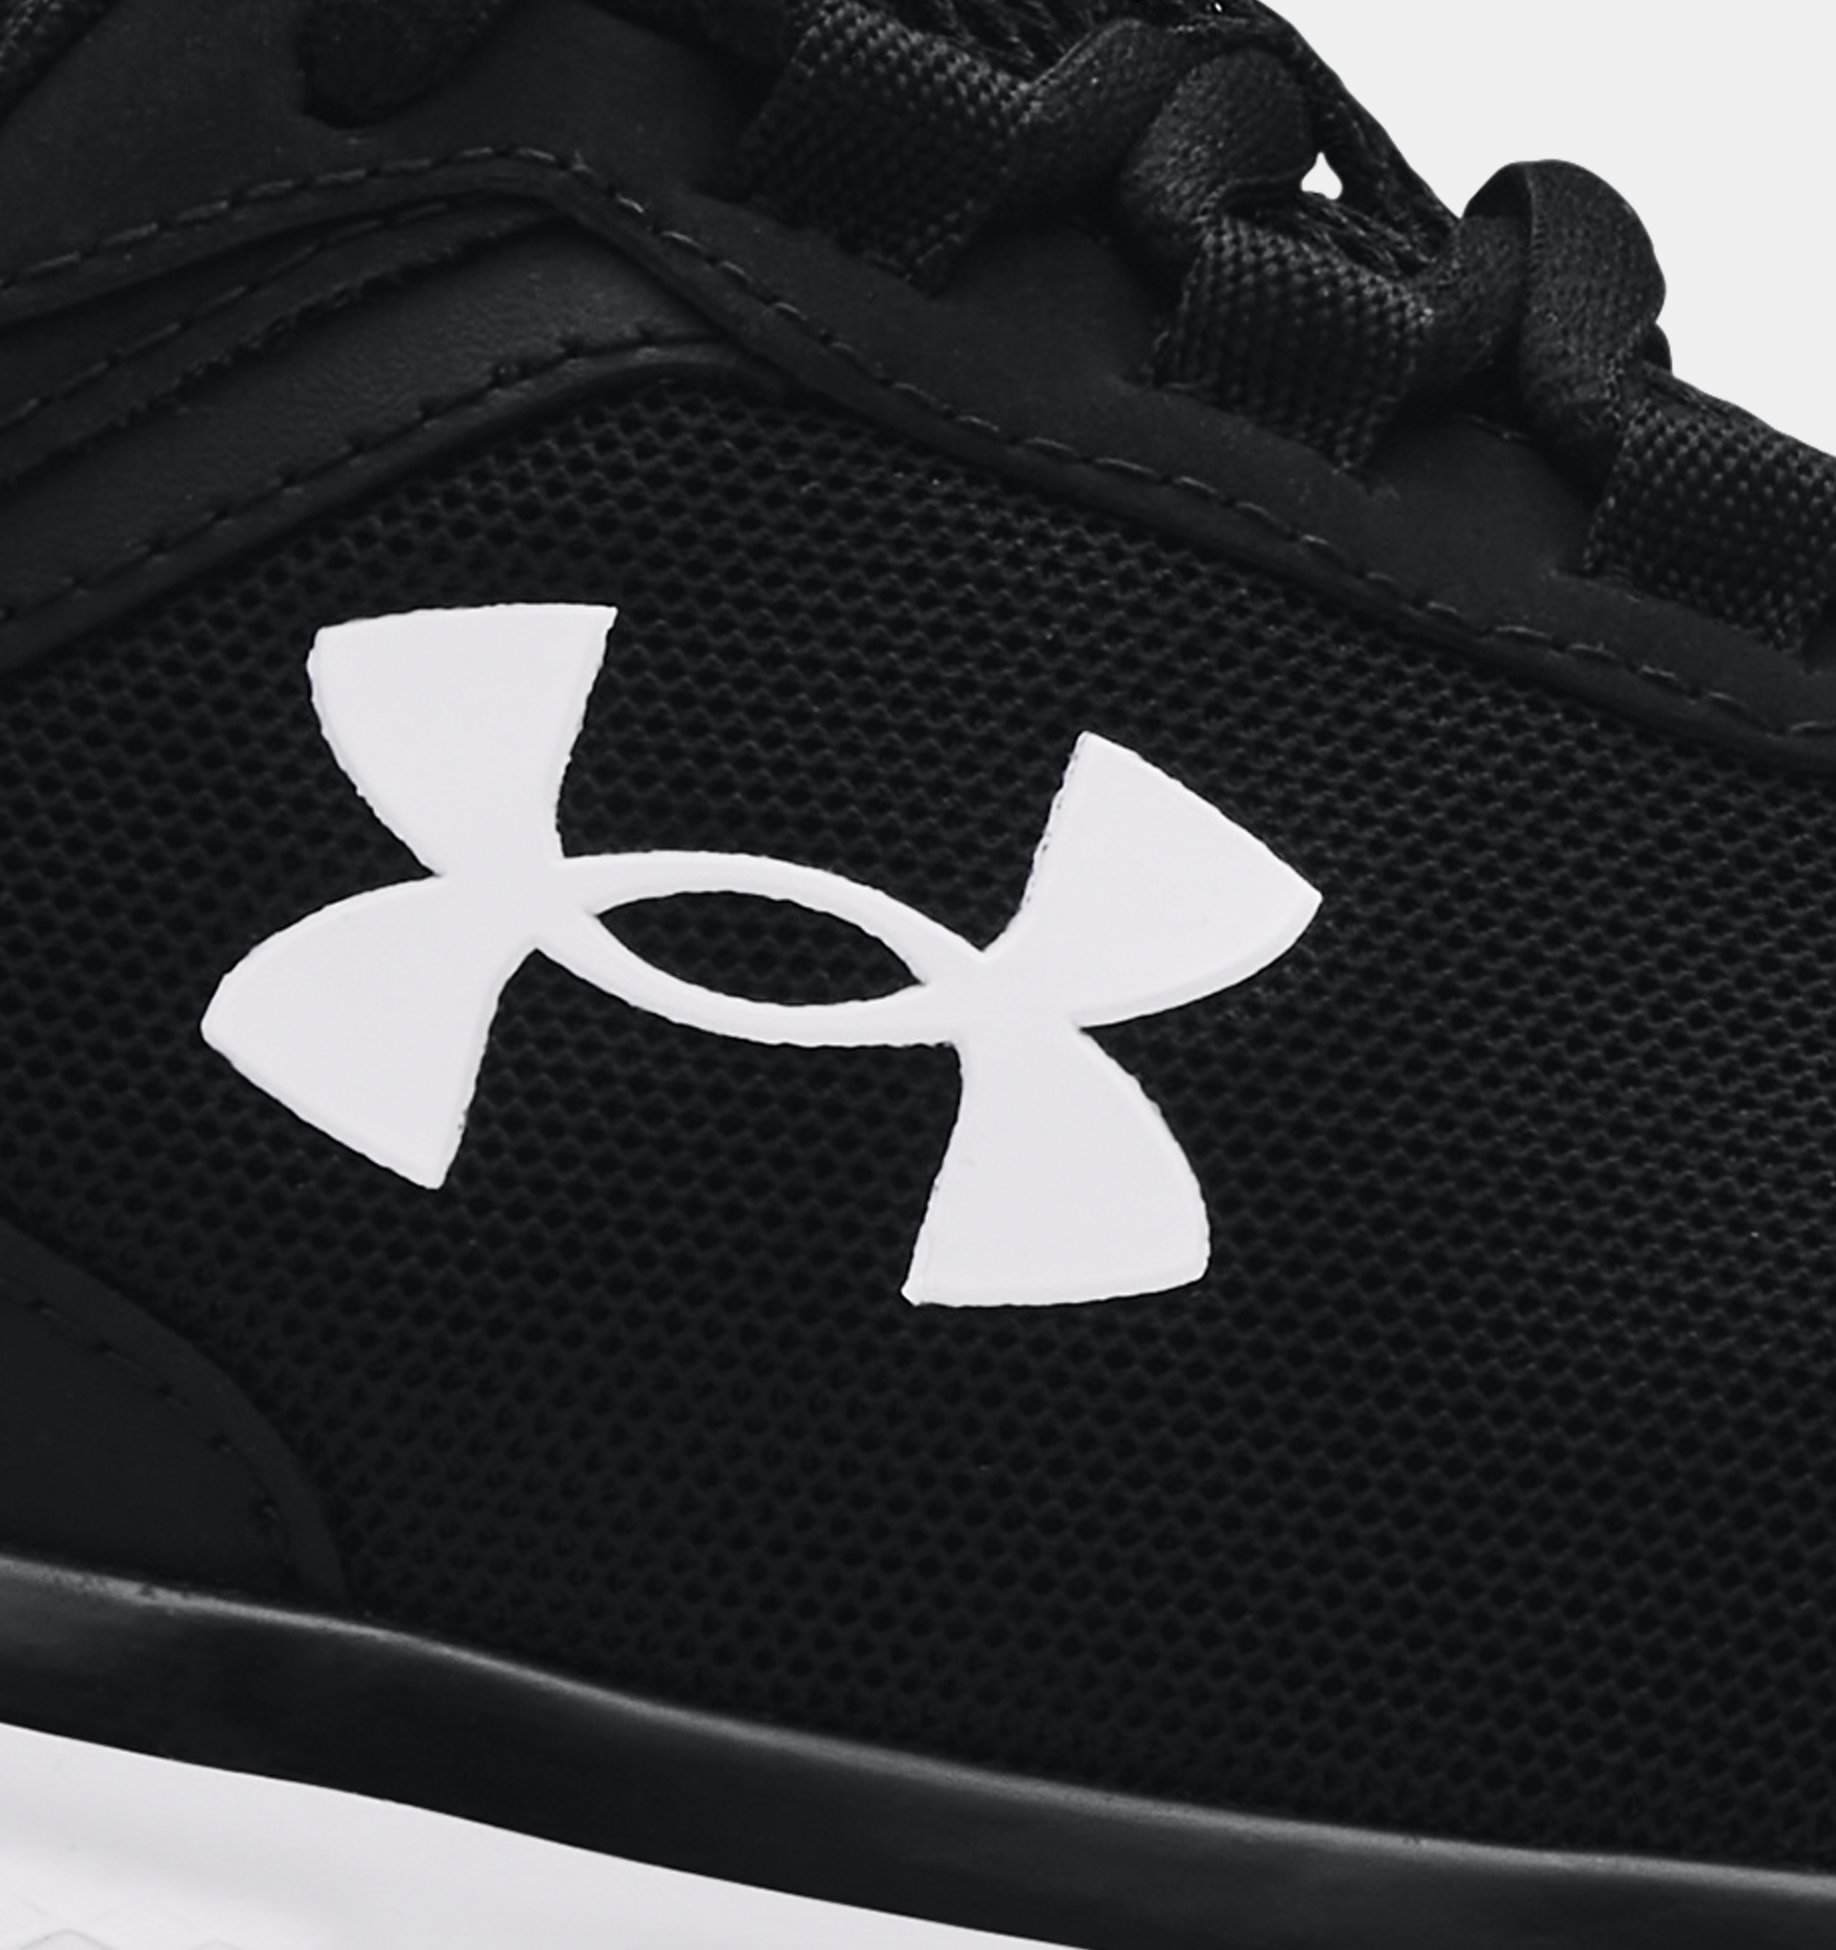 Are Under Armour Shoes Slip Resistant?